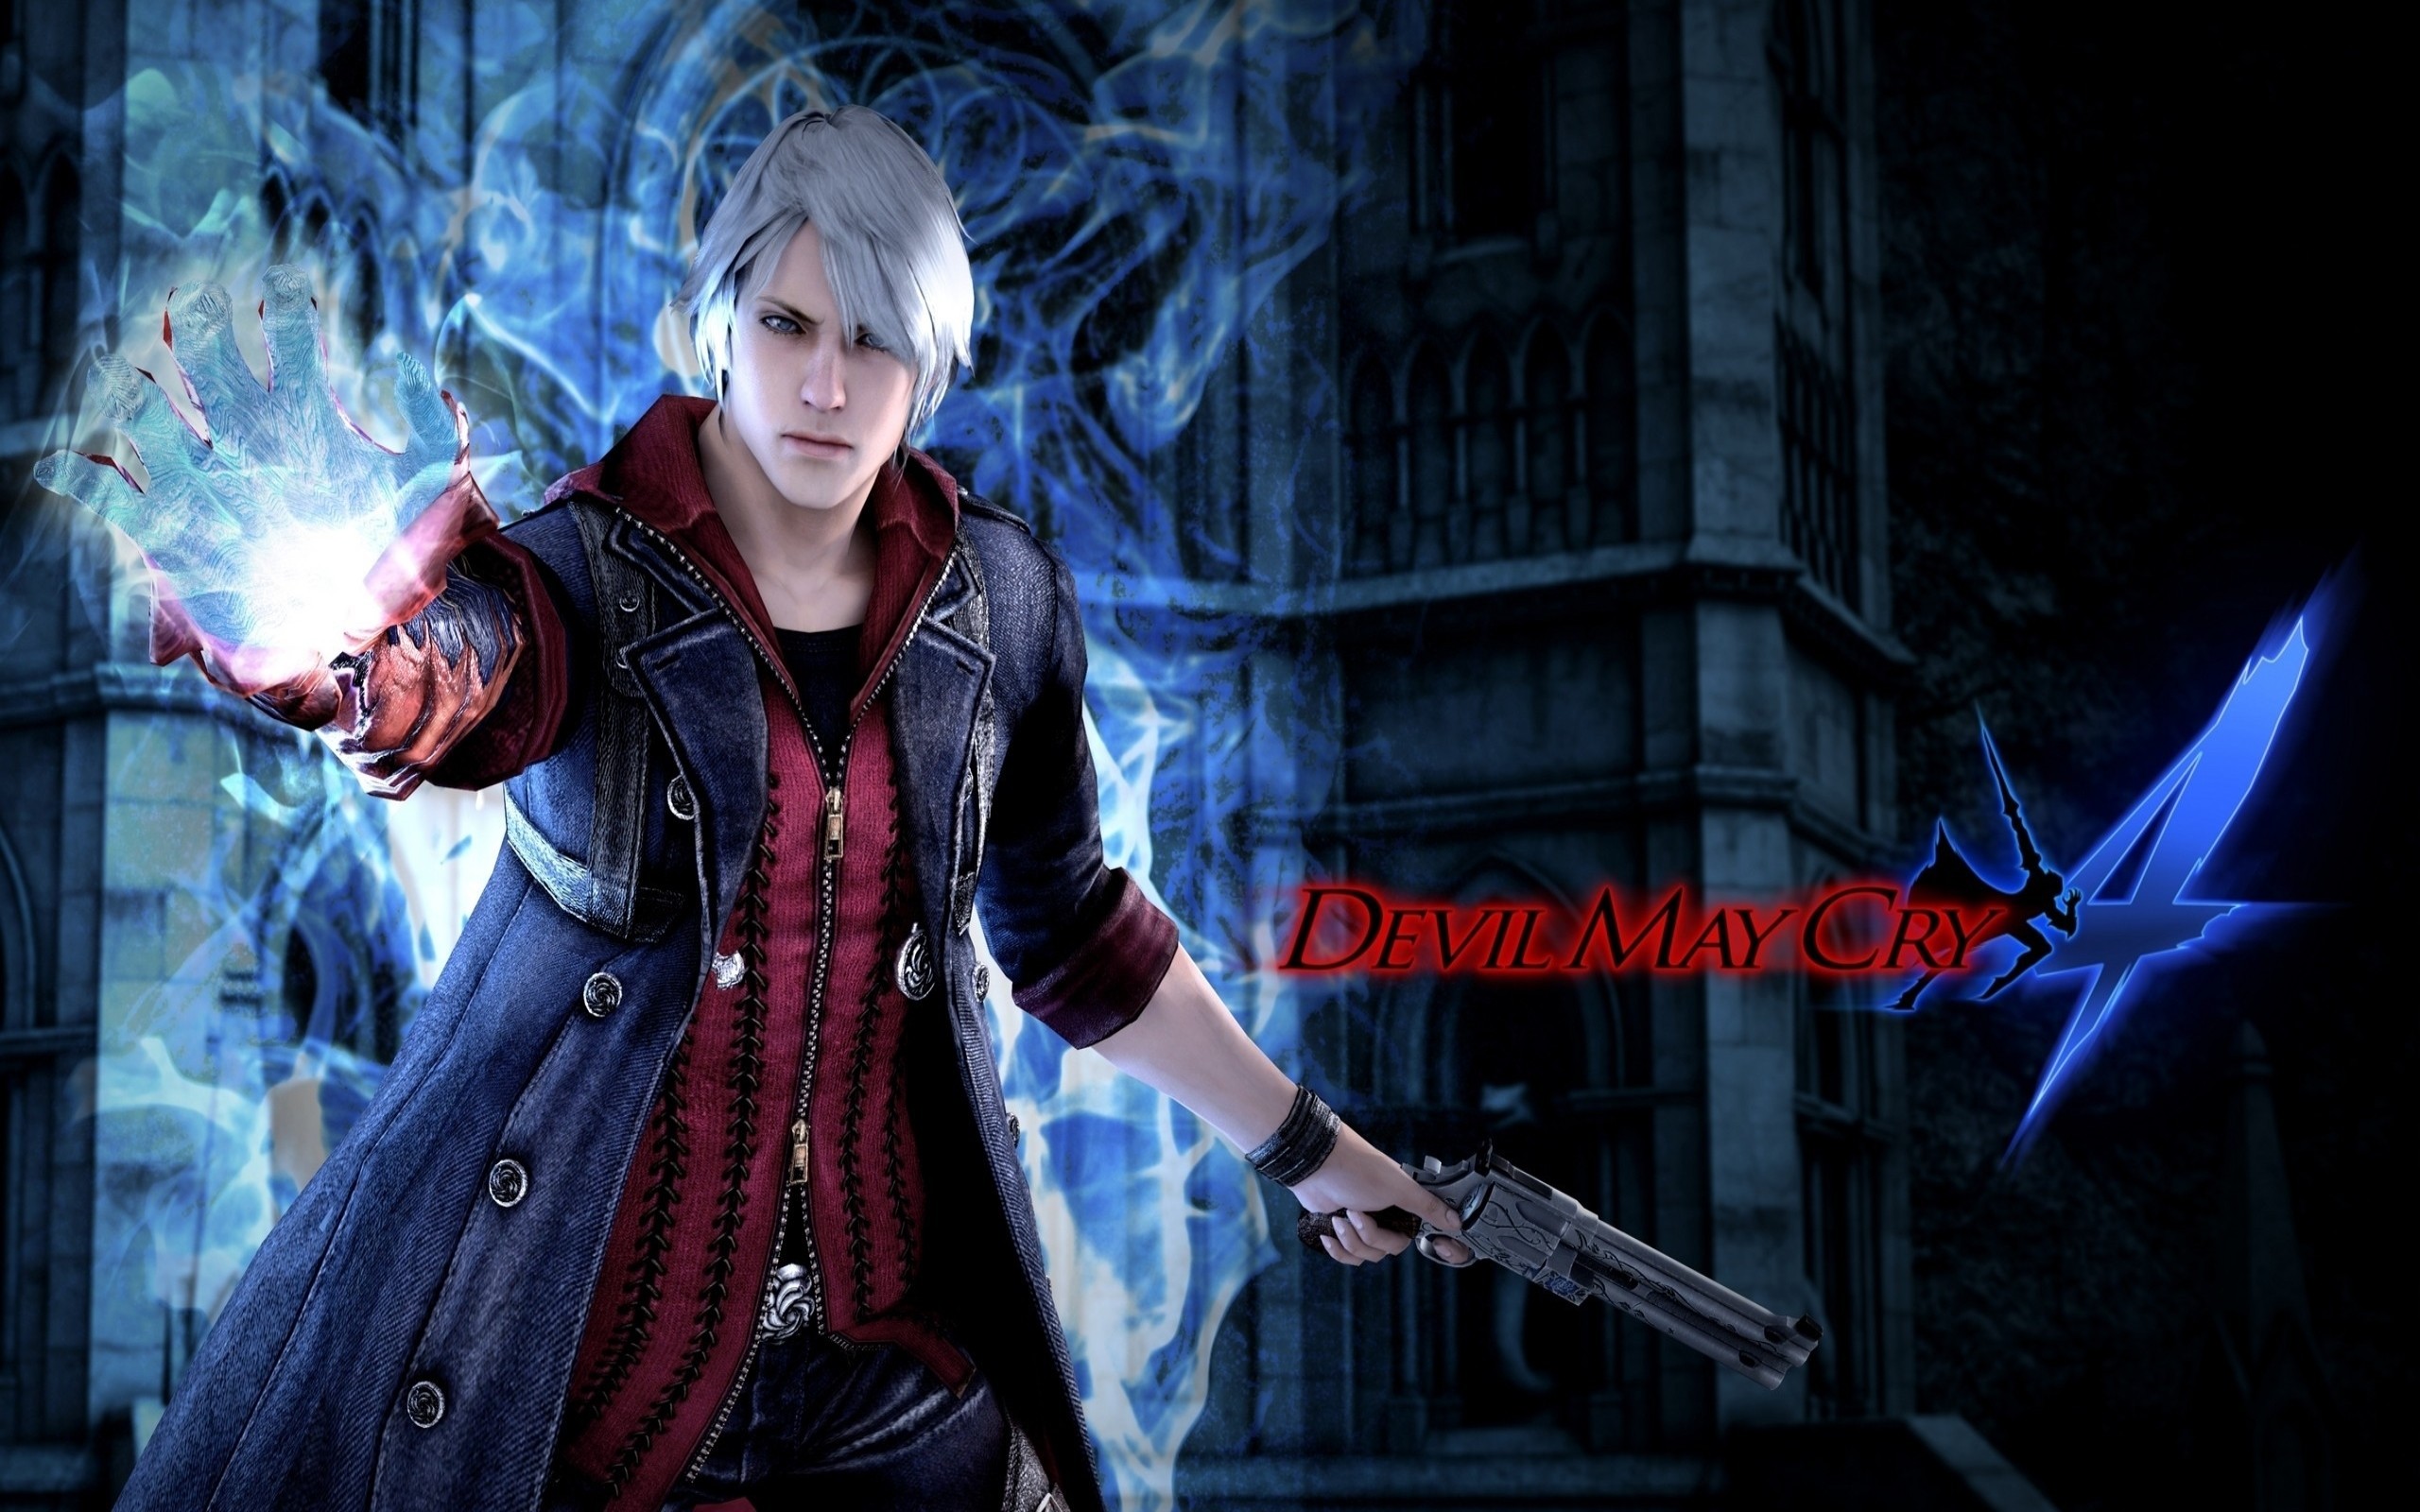 2560x1600  Devil May Cry 4 | HD Wallpapers. Download Â· 1920x1080 ...